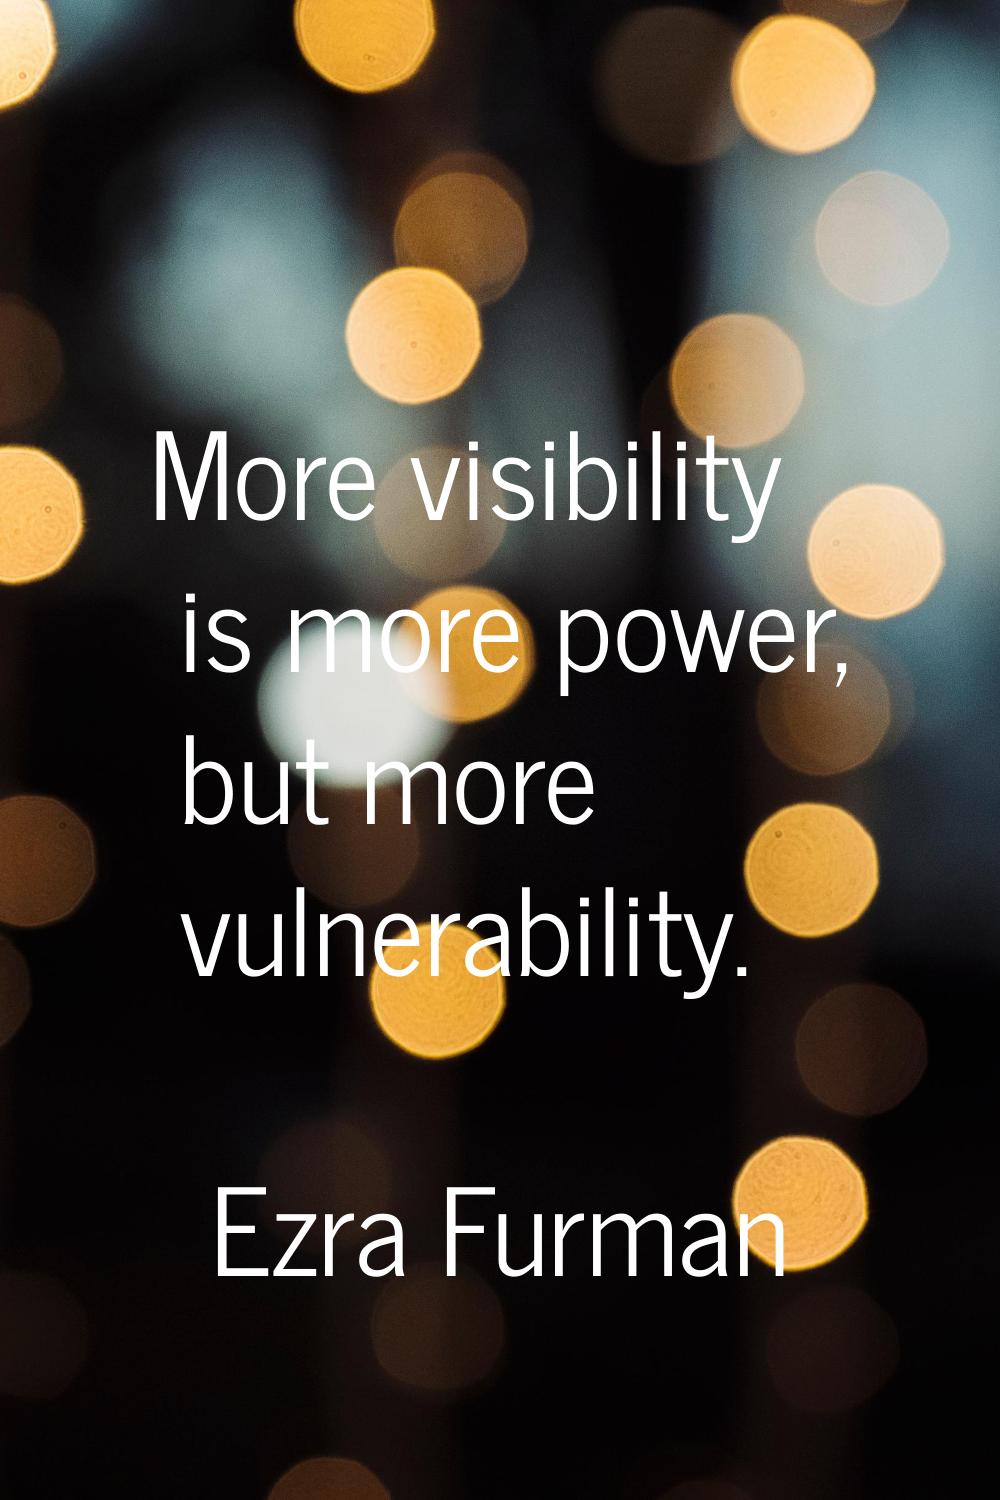 More visibility is more power, but more vulnerability.